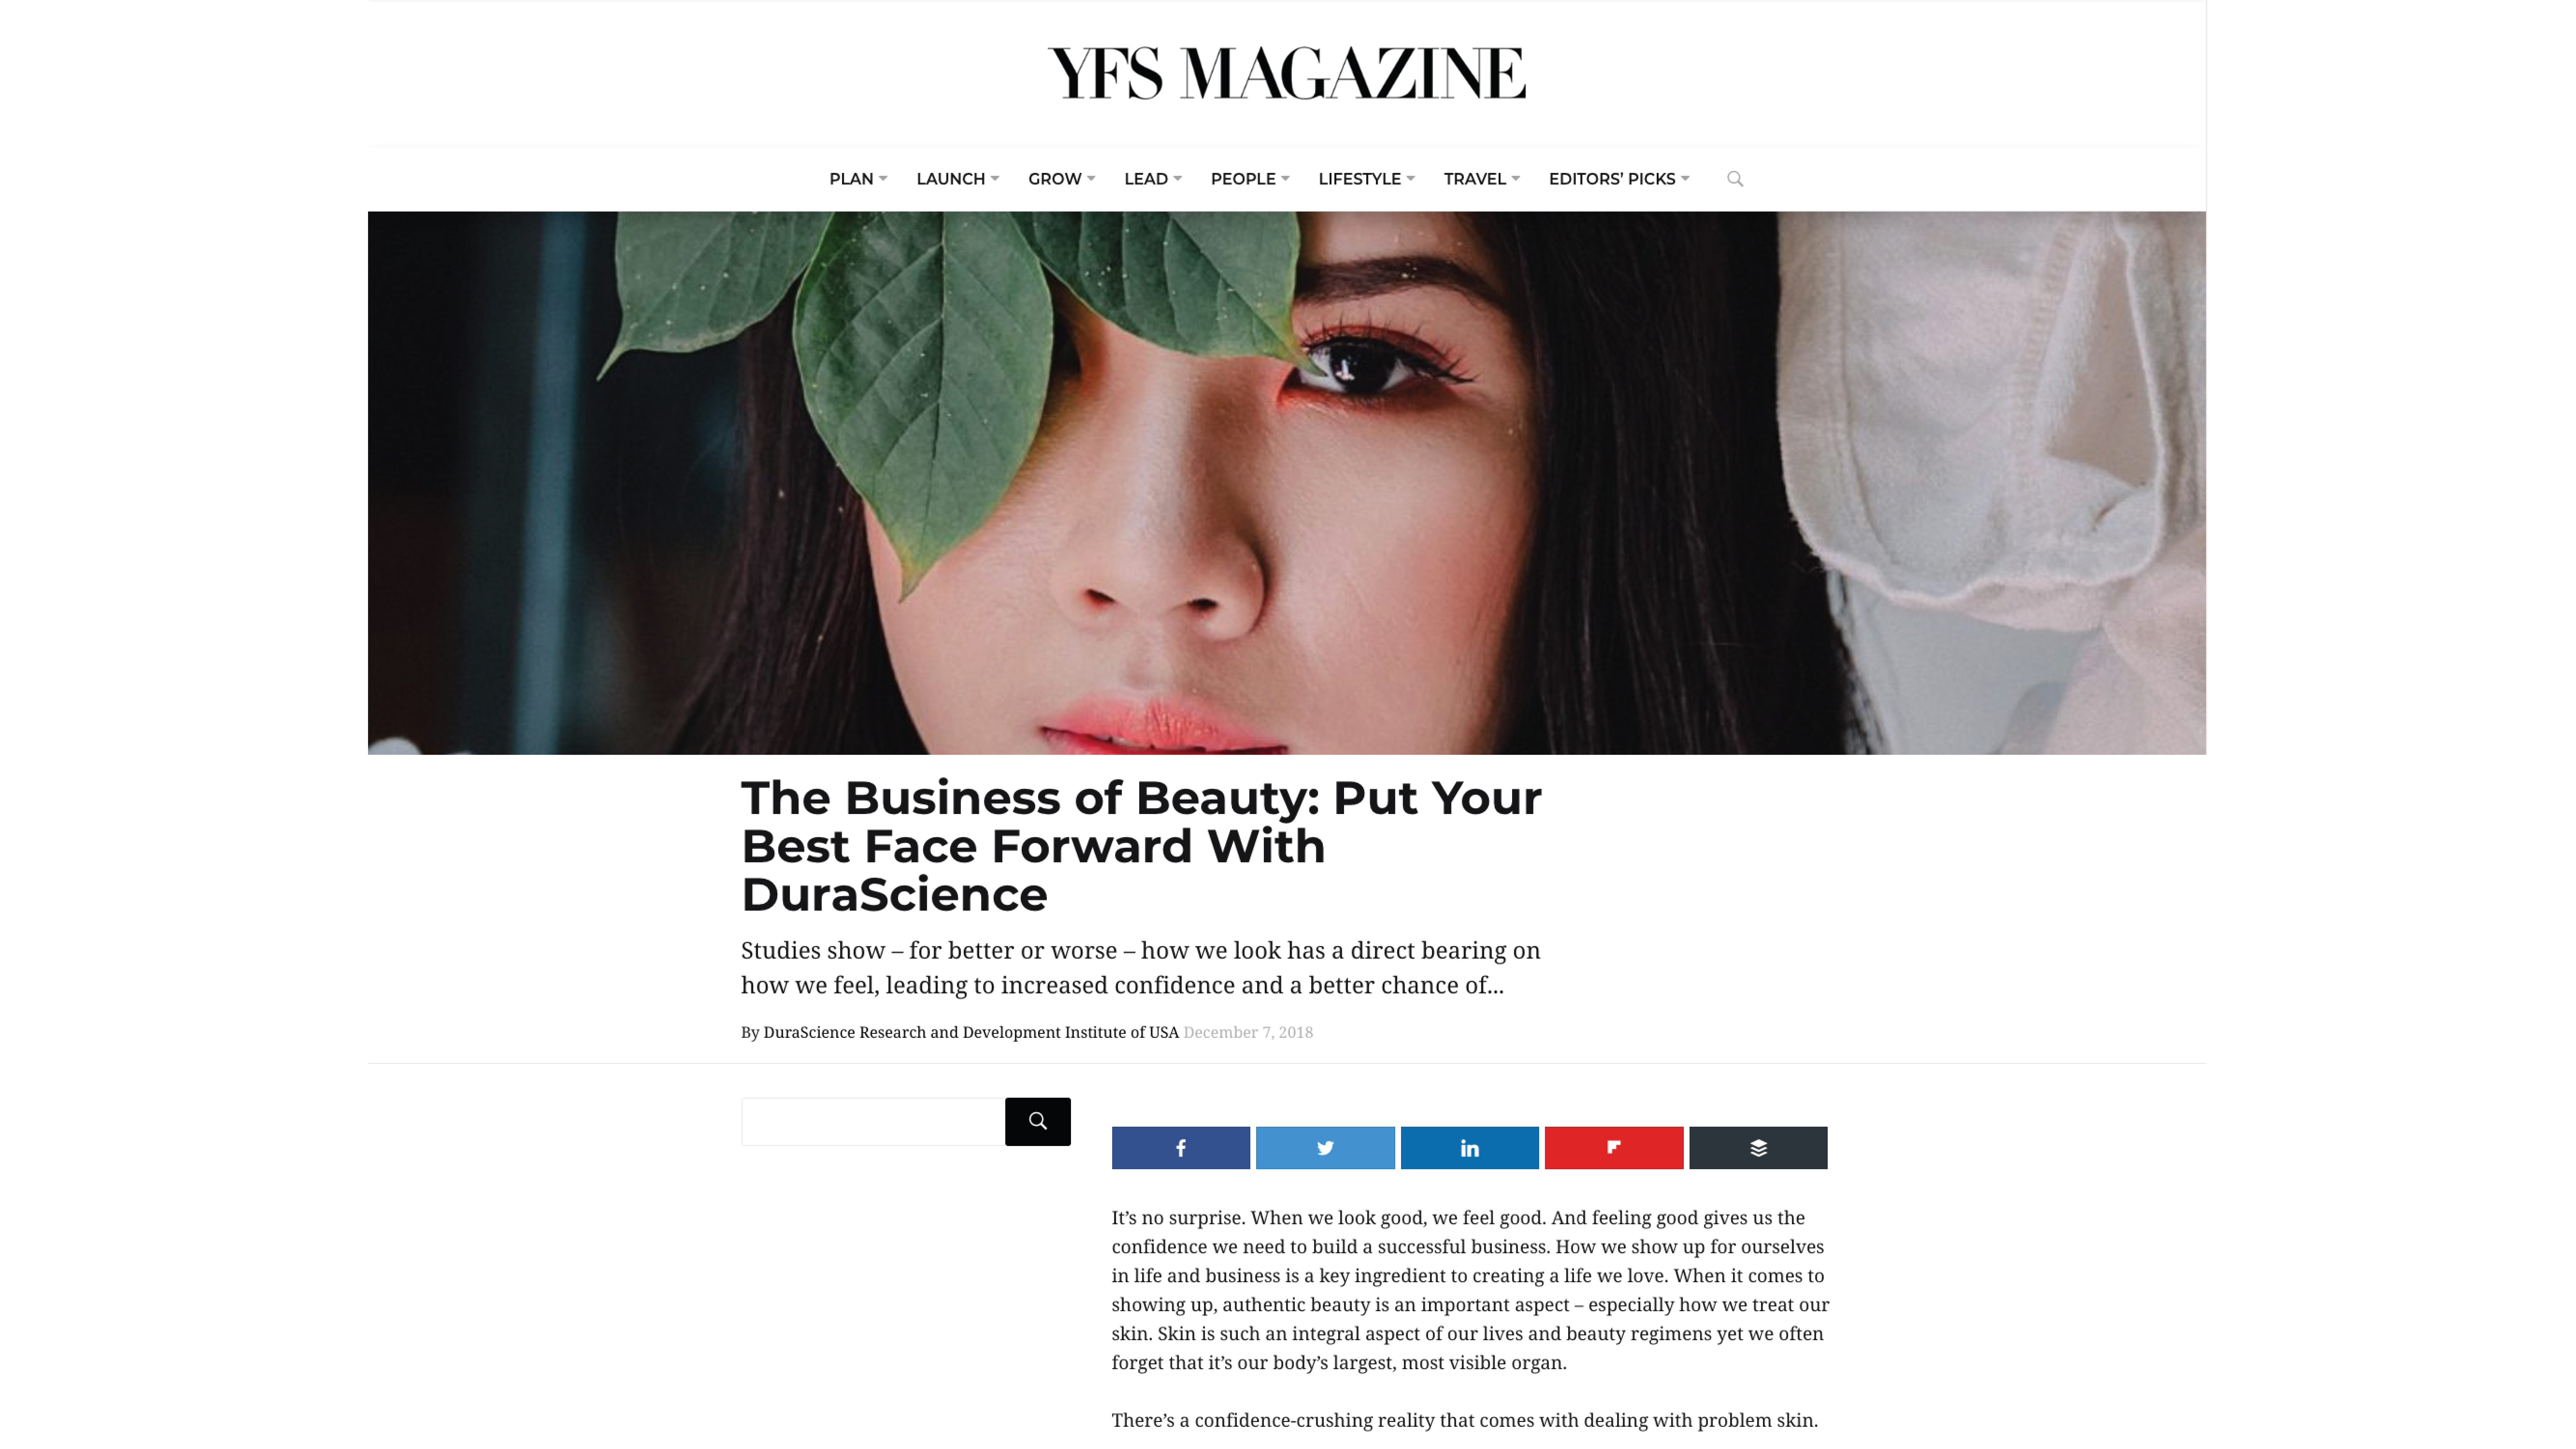 The Business Of Beauty: Put Your Best Face Forward With DuraScience